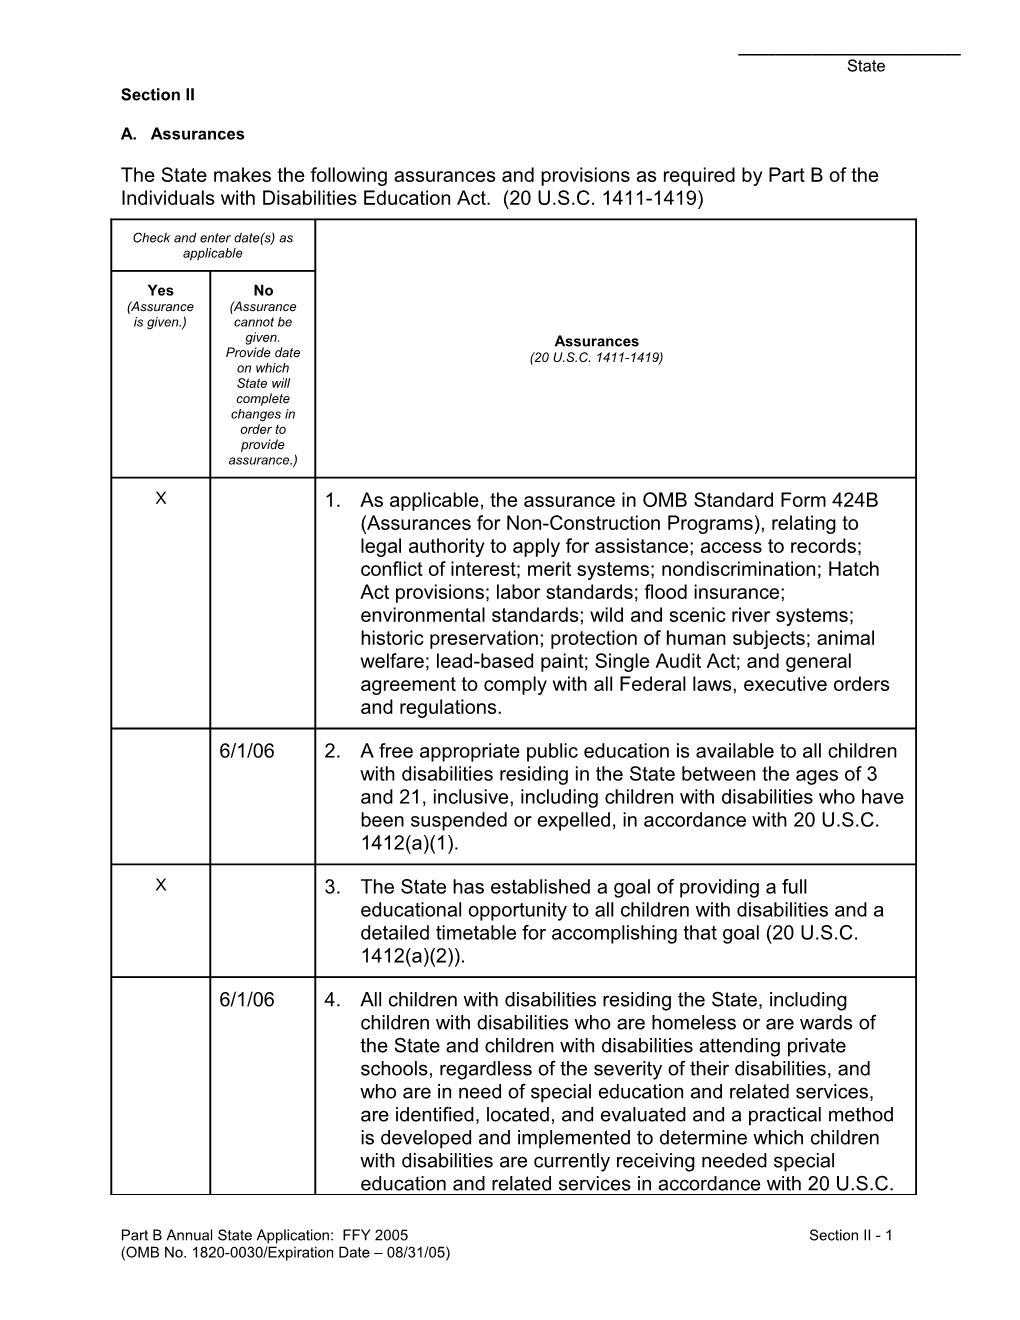 Part B Annual State Application: FFY 2005Section II - 1